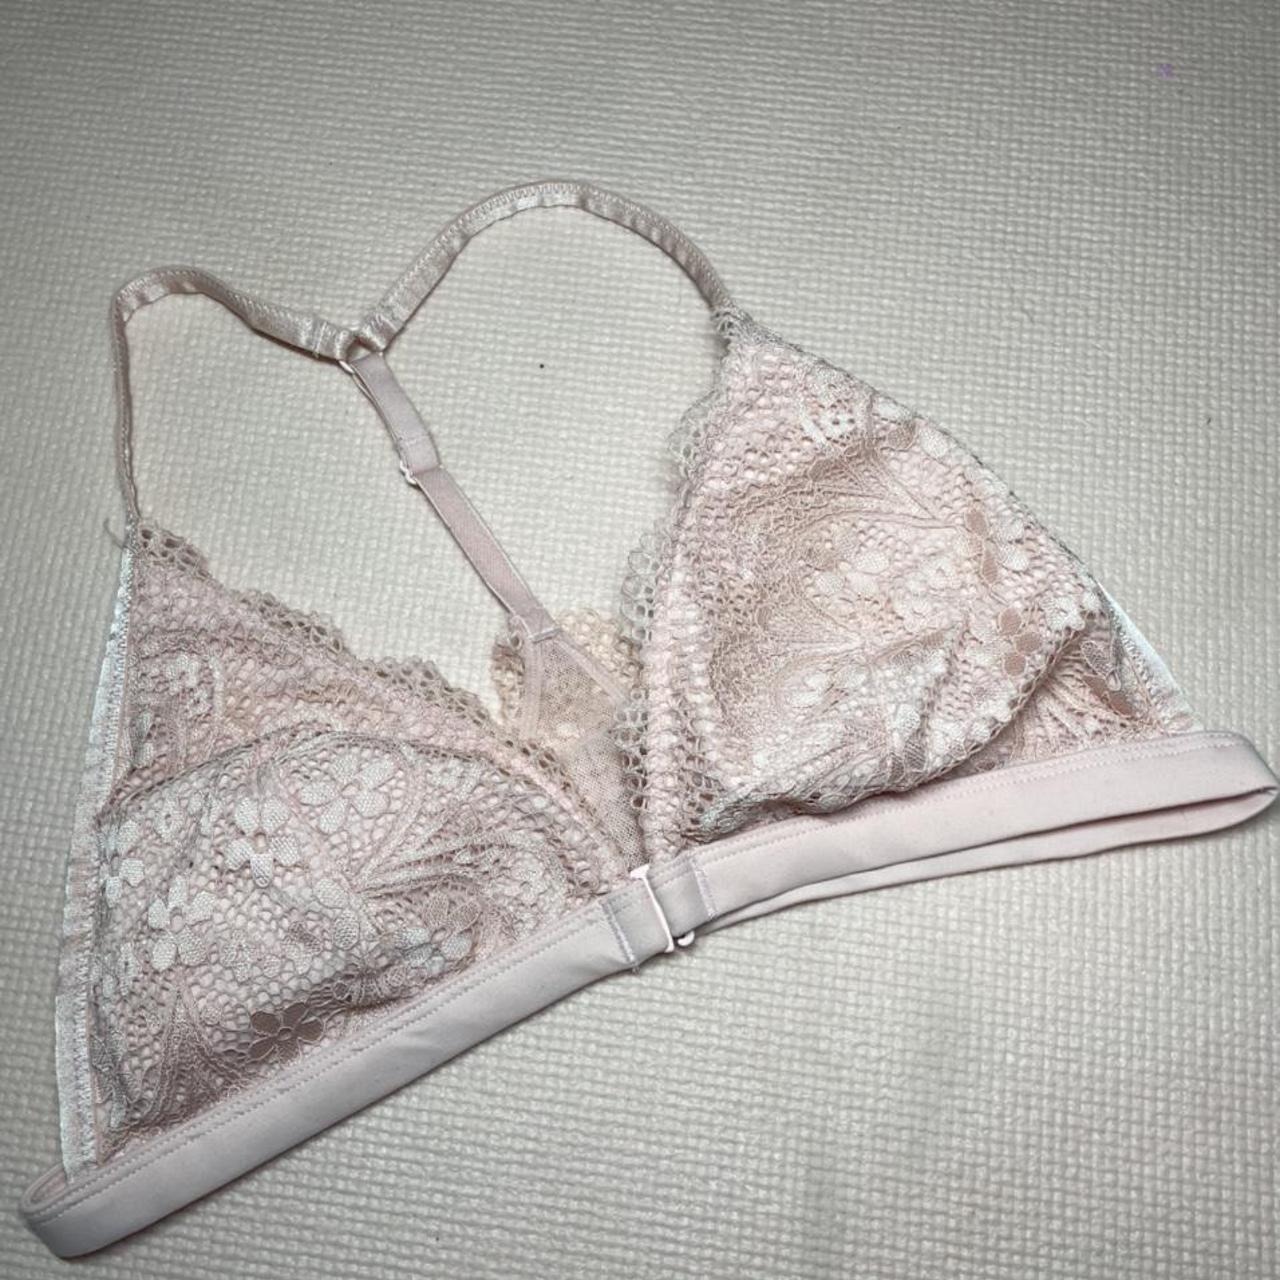 Sparkly Light Pink Bralette✨🌷 tag was cut out for - Depop